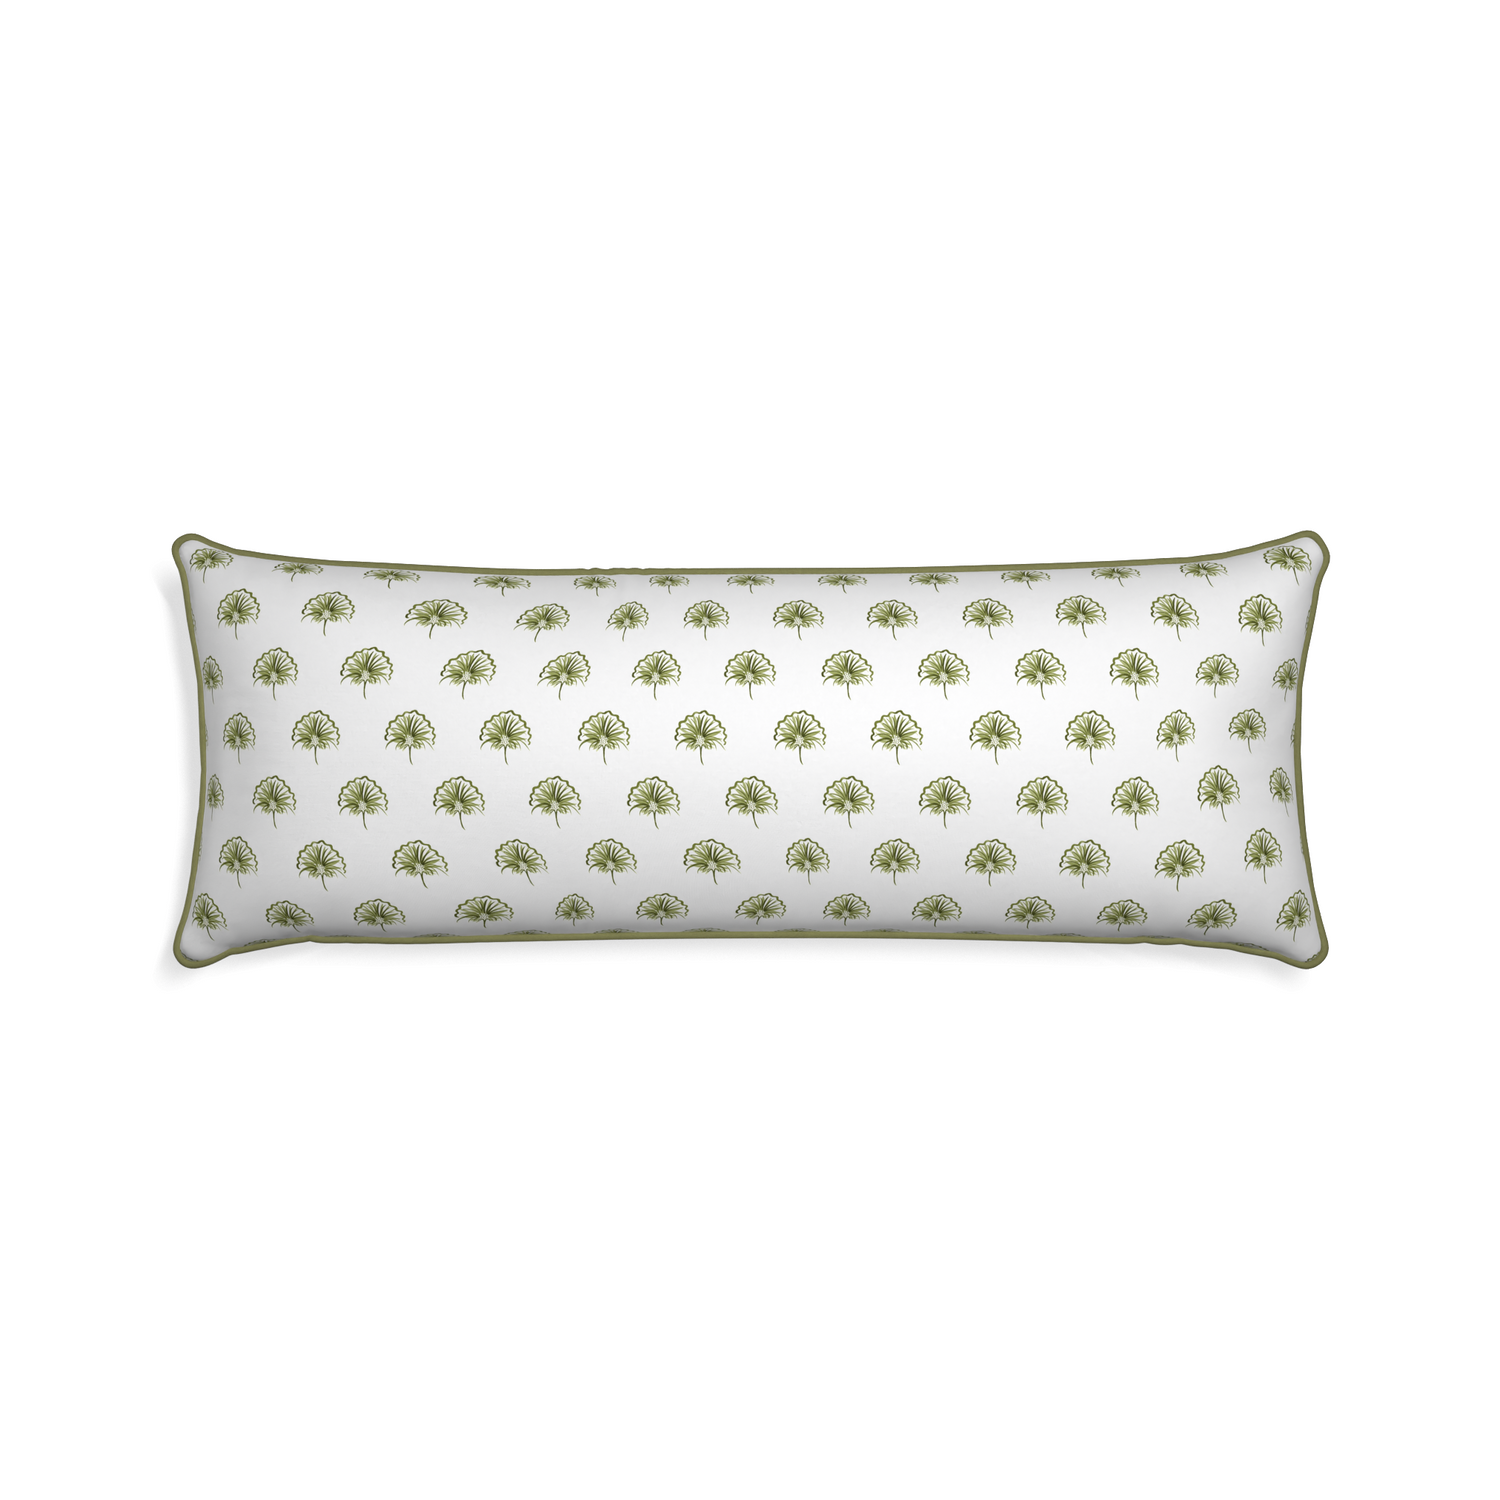 Xl-lumbar penelope moss custom green floralpillow with moss piping on white background